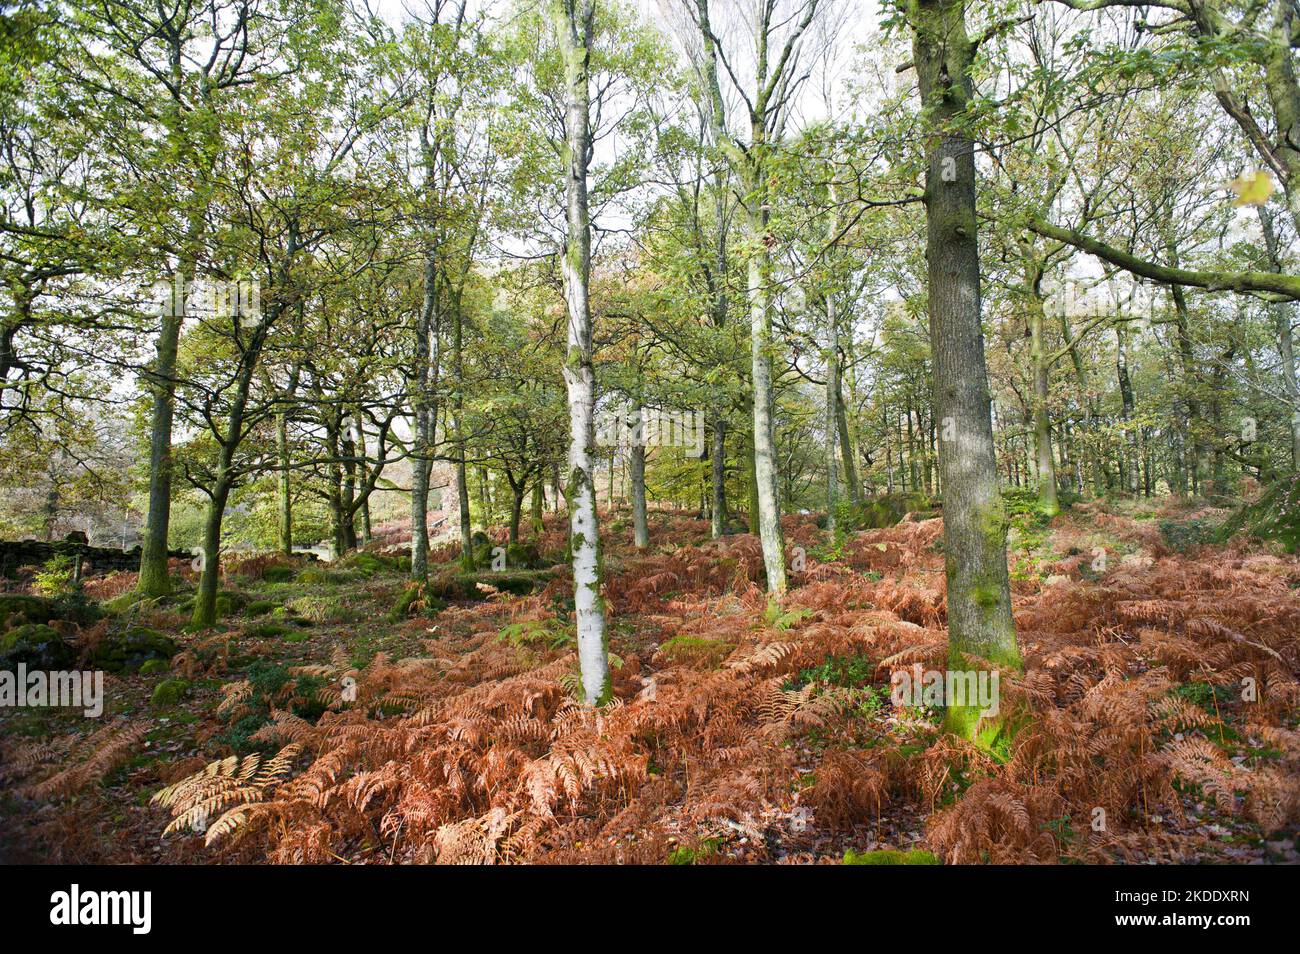 Autumn or fall woodland landscape with brown bracken carpeting the floor beneath the trees marking the changing season Stock Photo